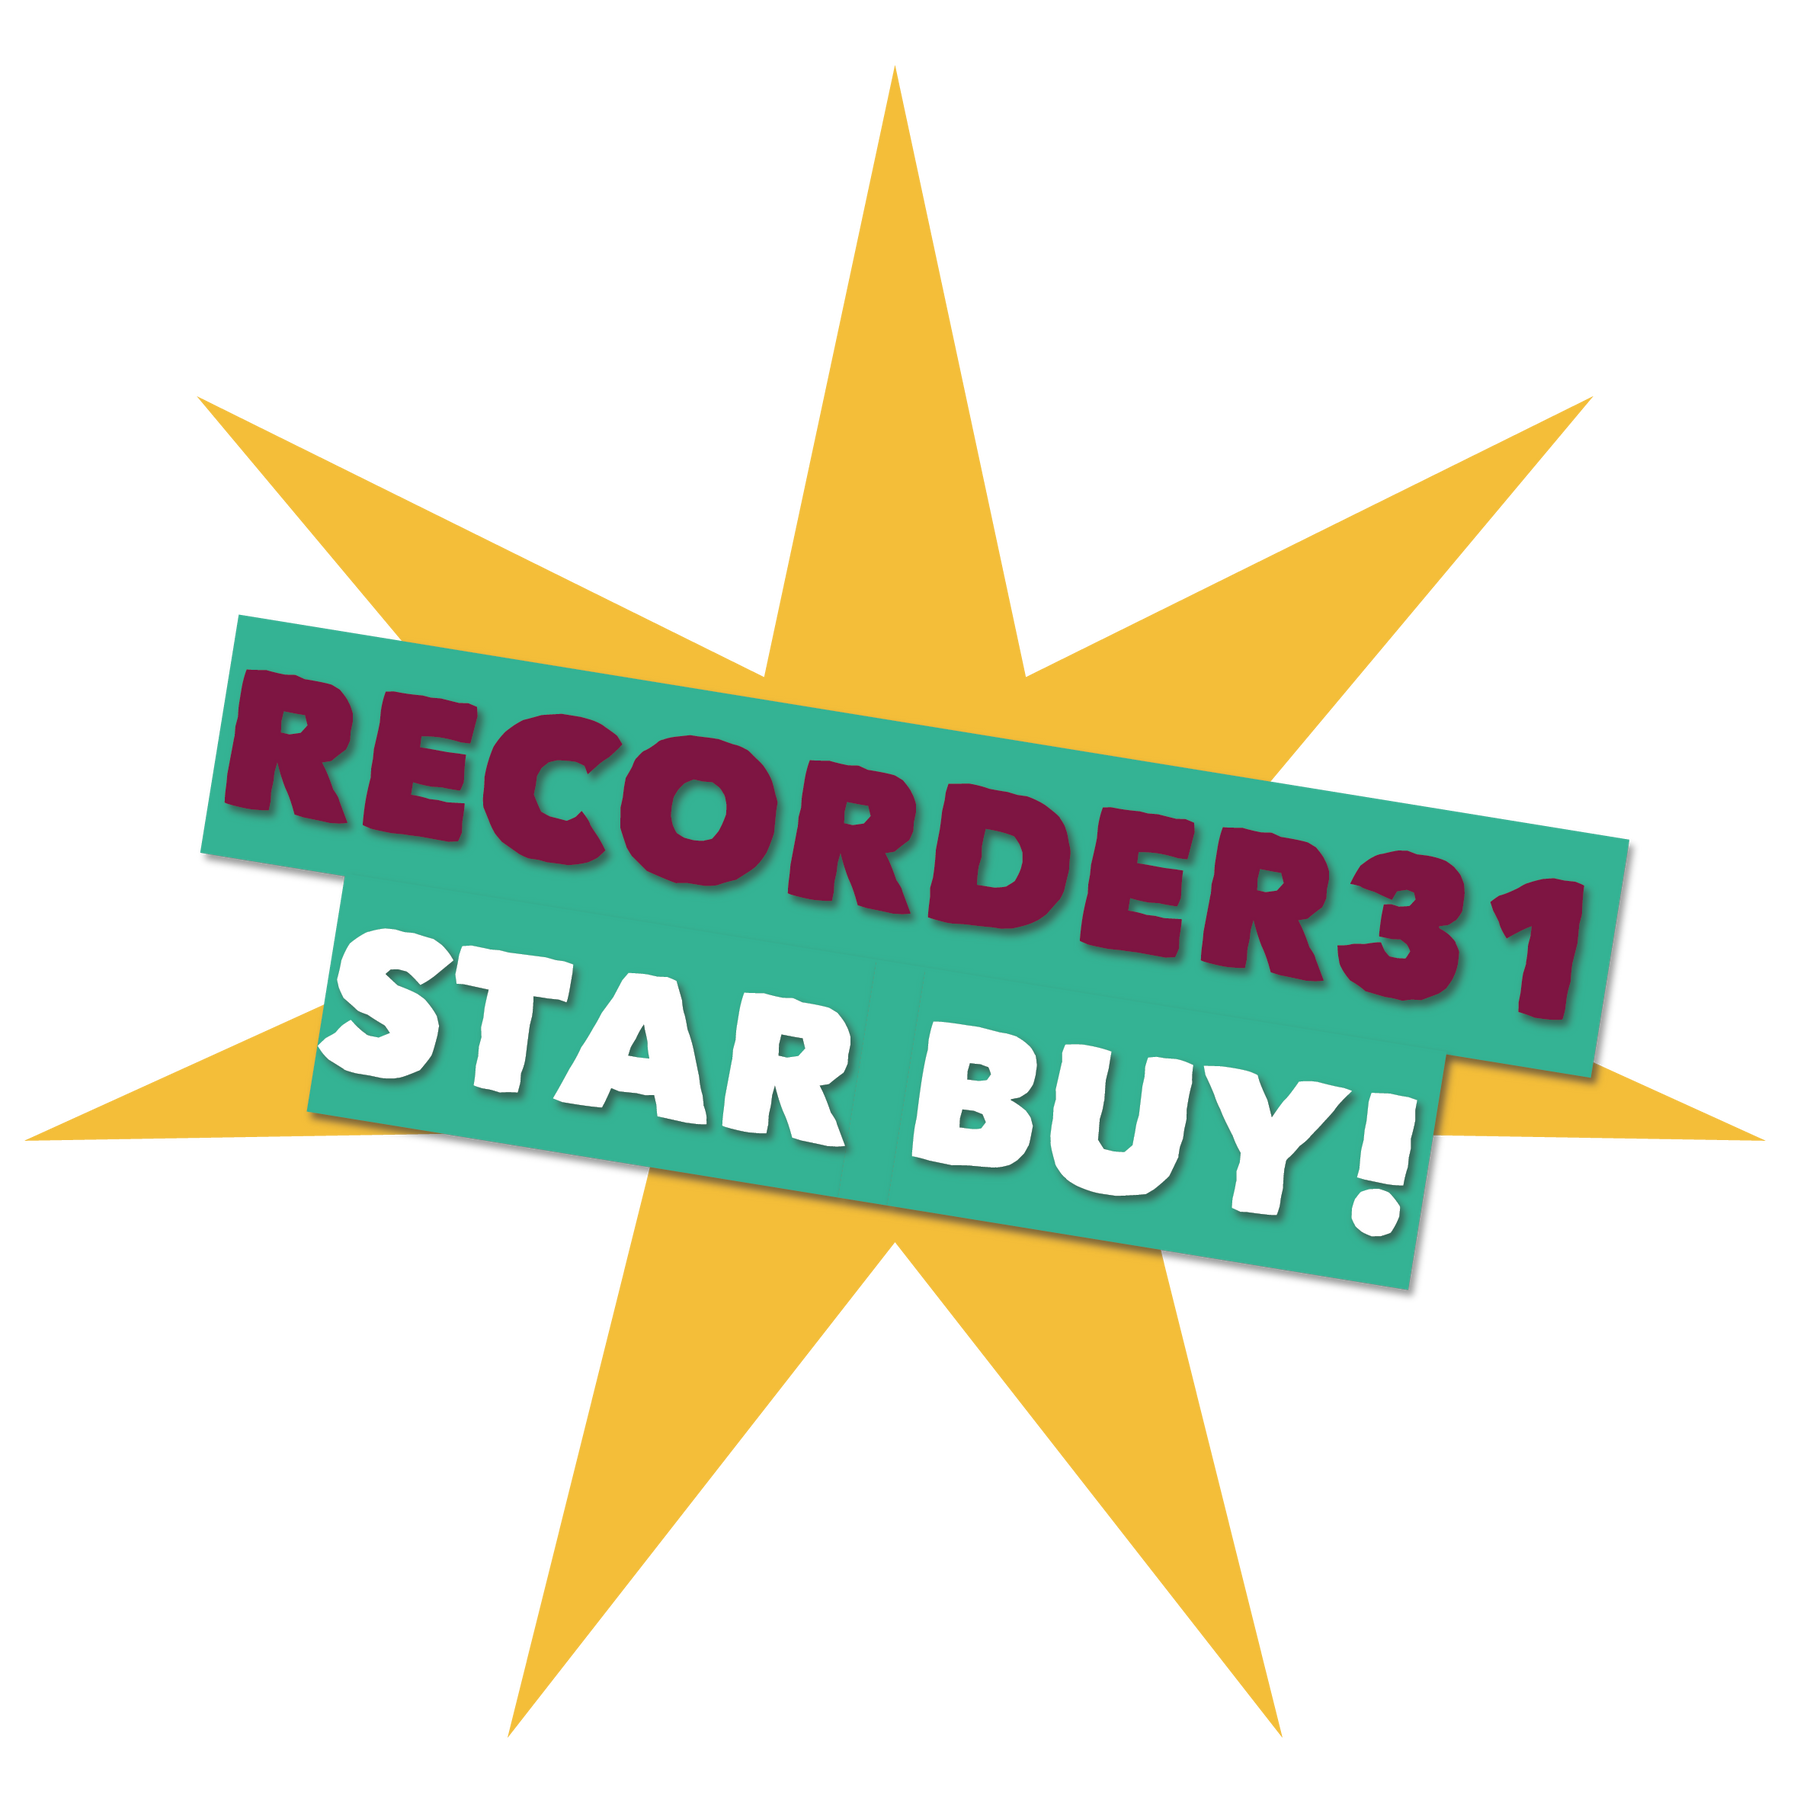 Recorder31 Day 30 | Star Buys in our Big Recorder31 Round-Up!